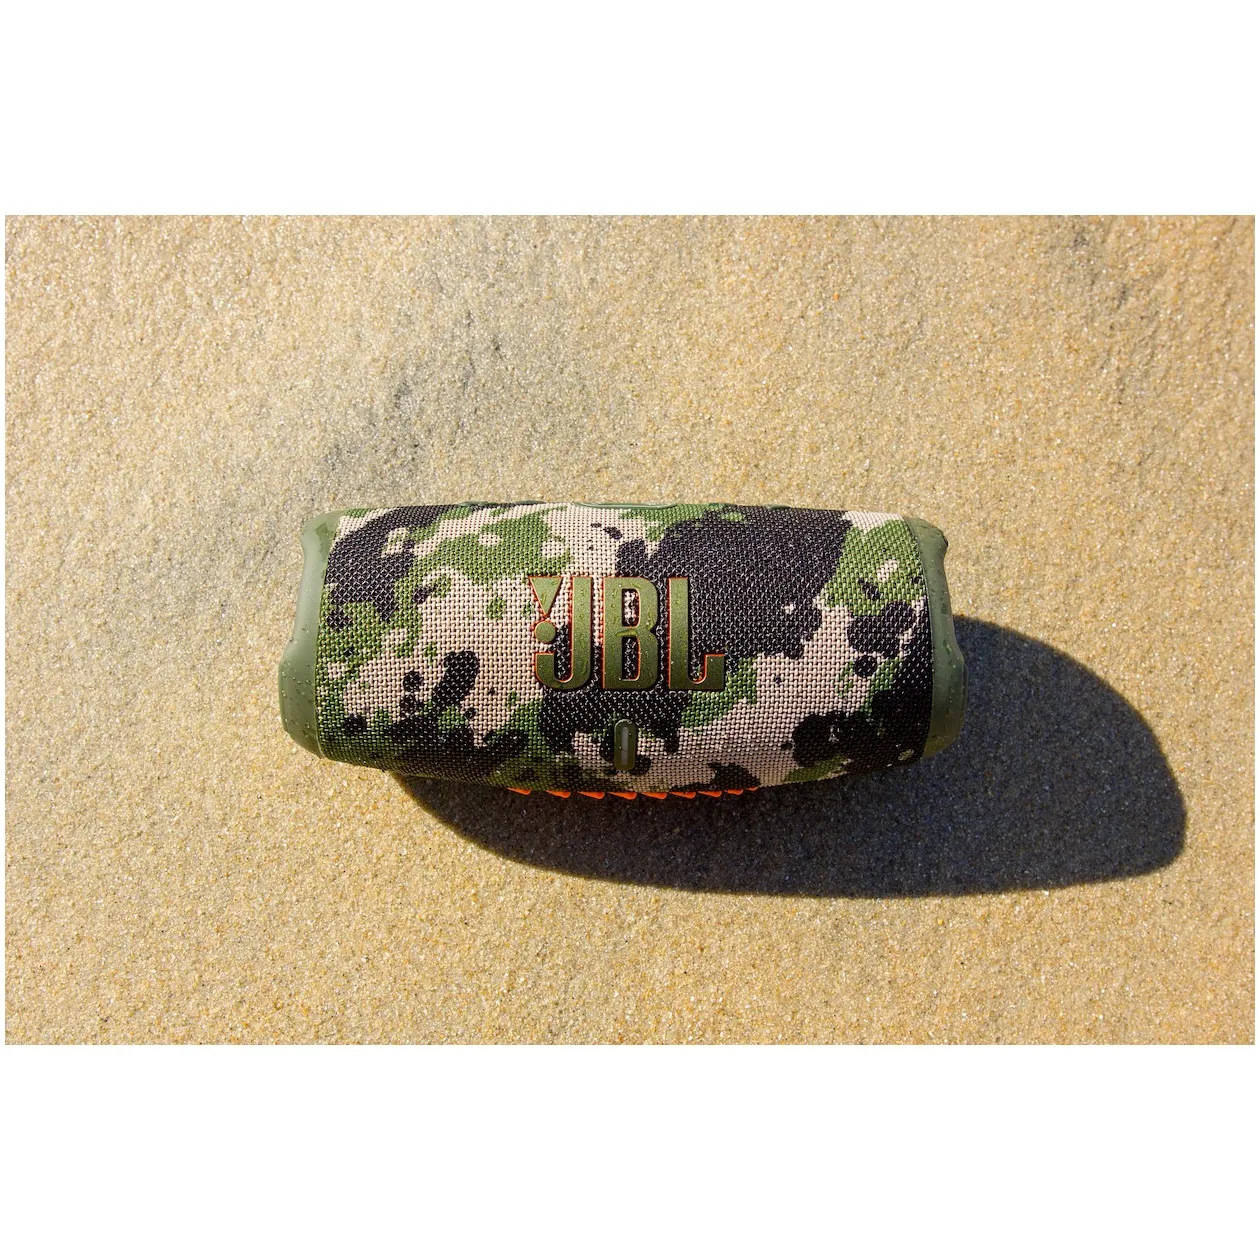 JBL CHARGE 5 Camouflage